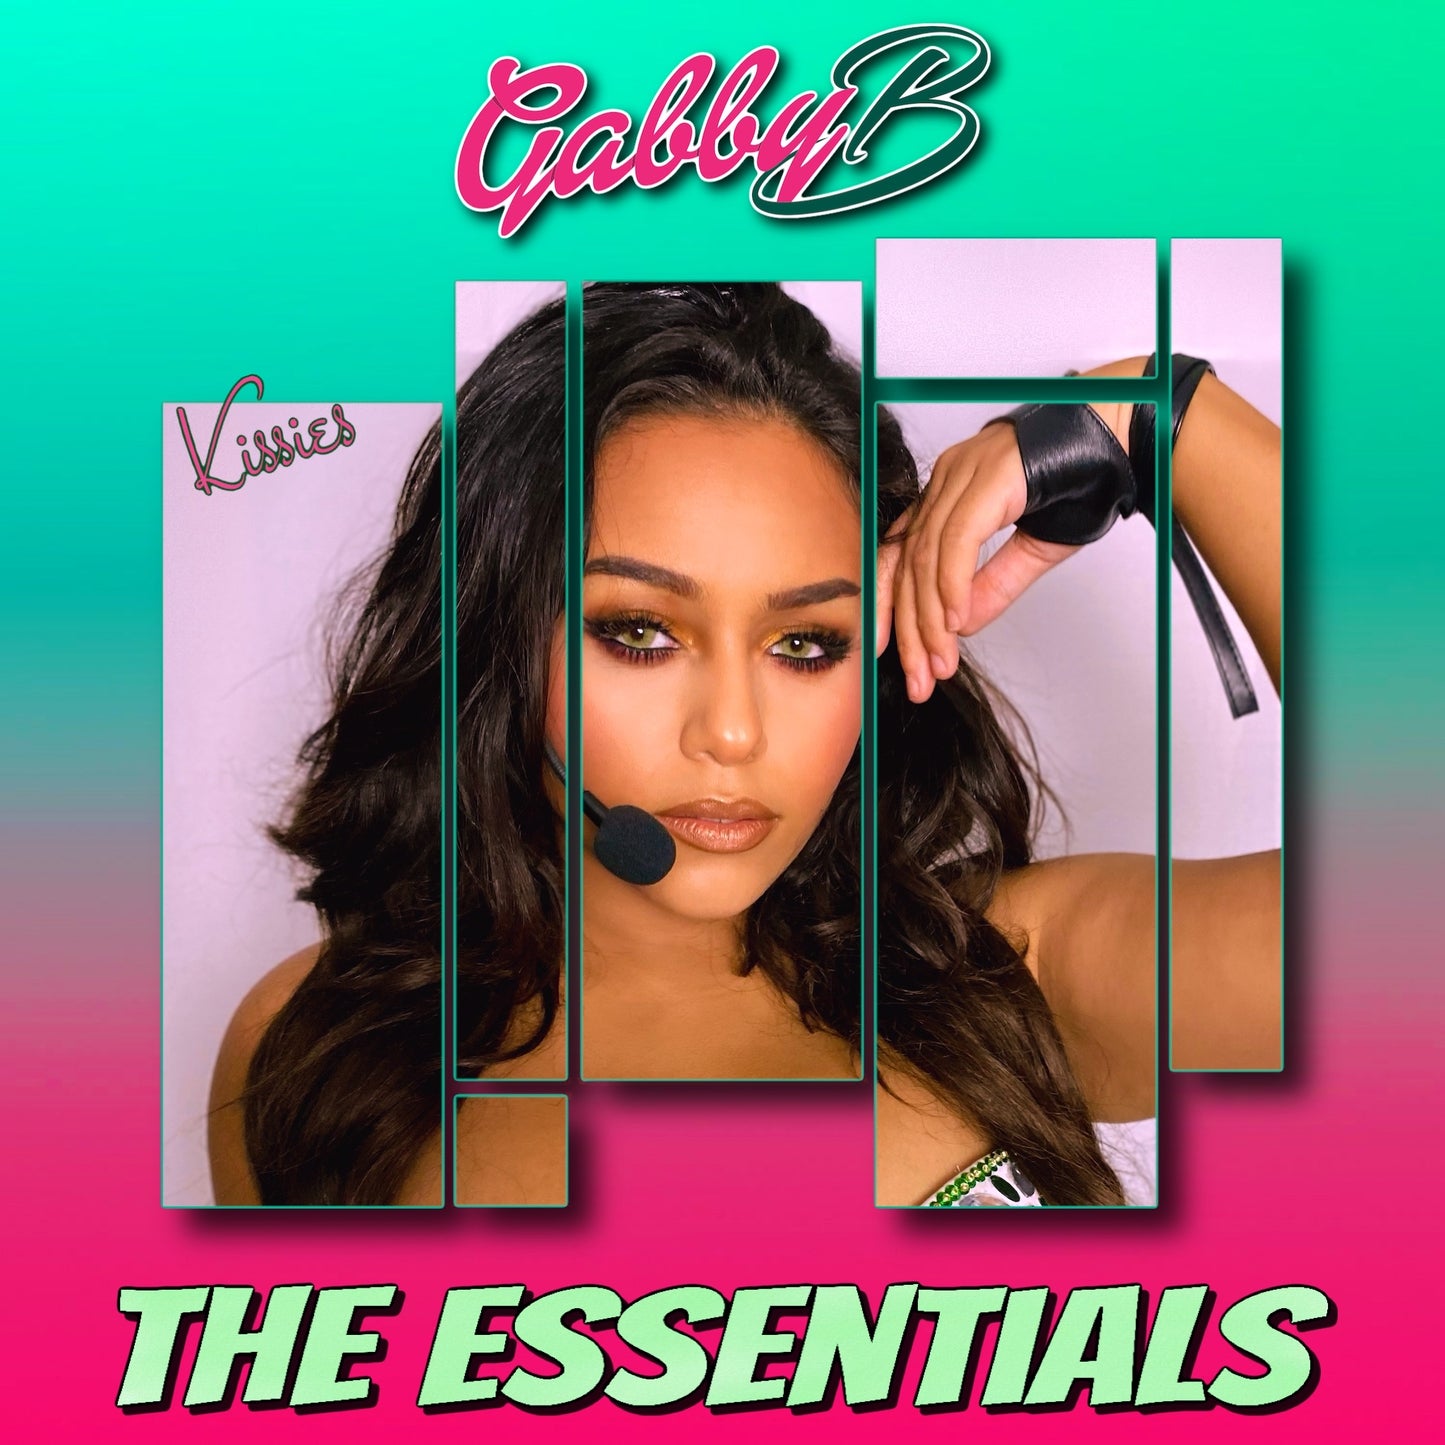 Gabby B - "The Essentials" Autographed CD